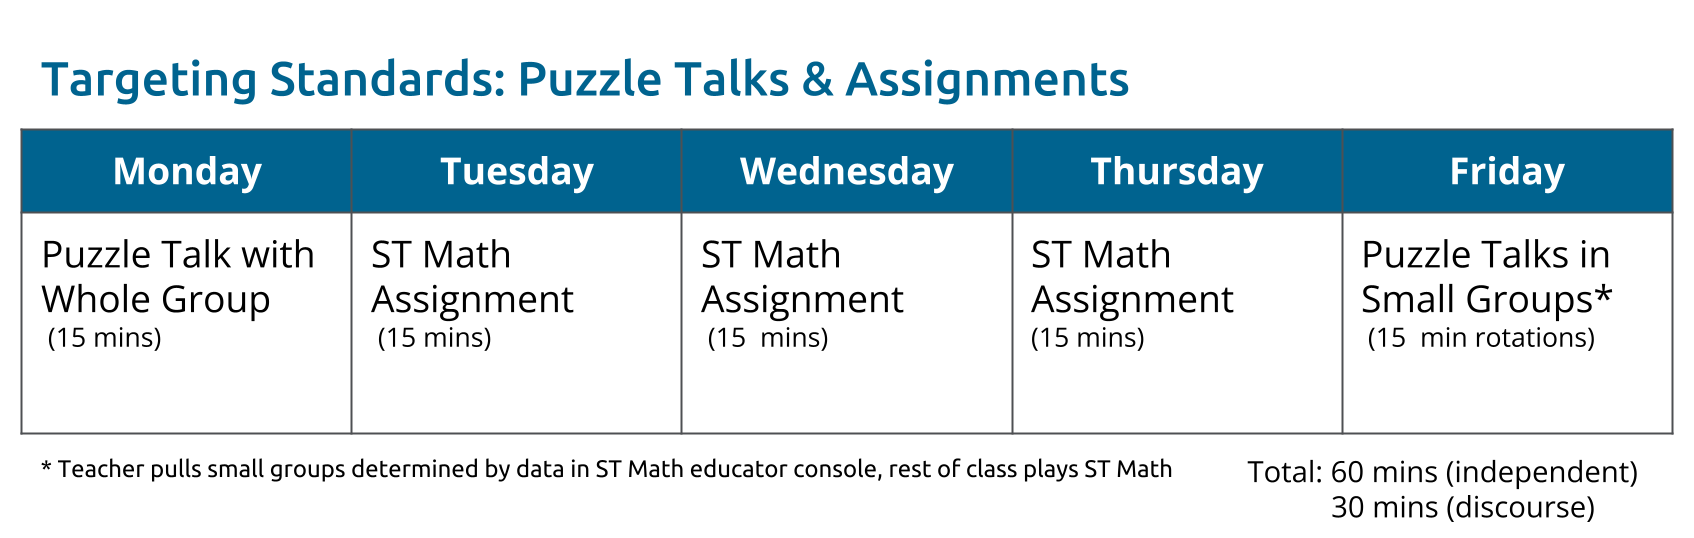 weekly_schedule_puzzle_talks.png